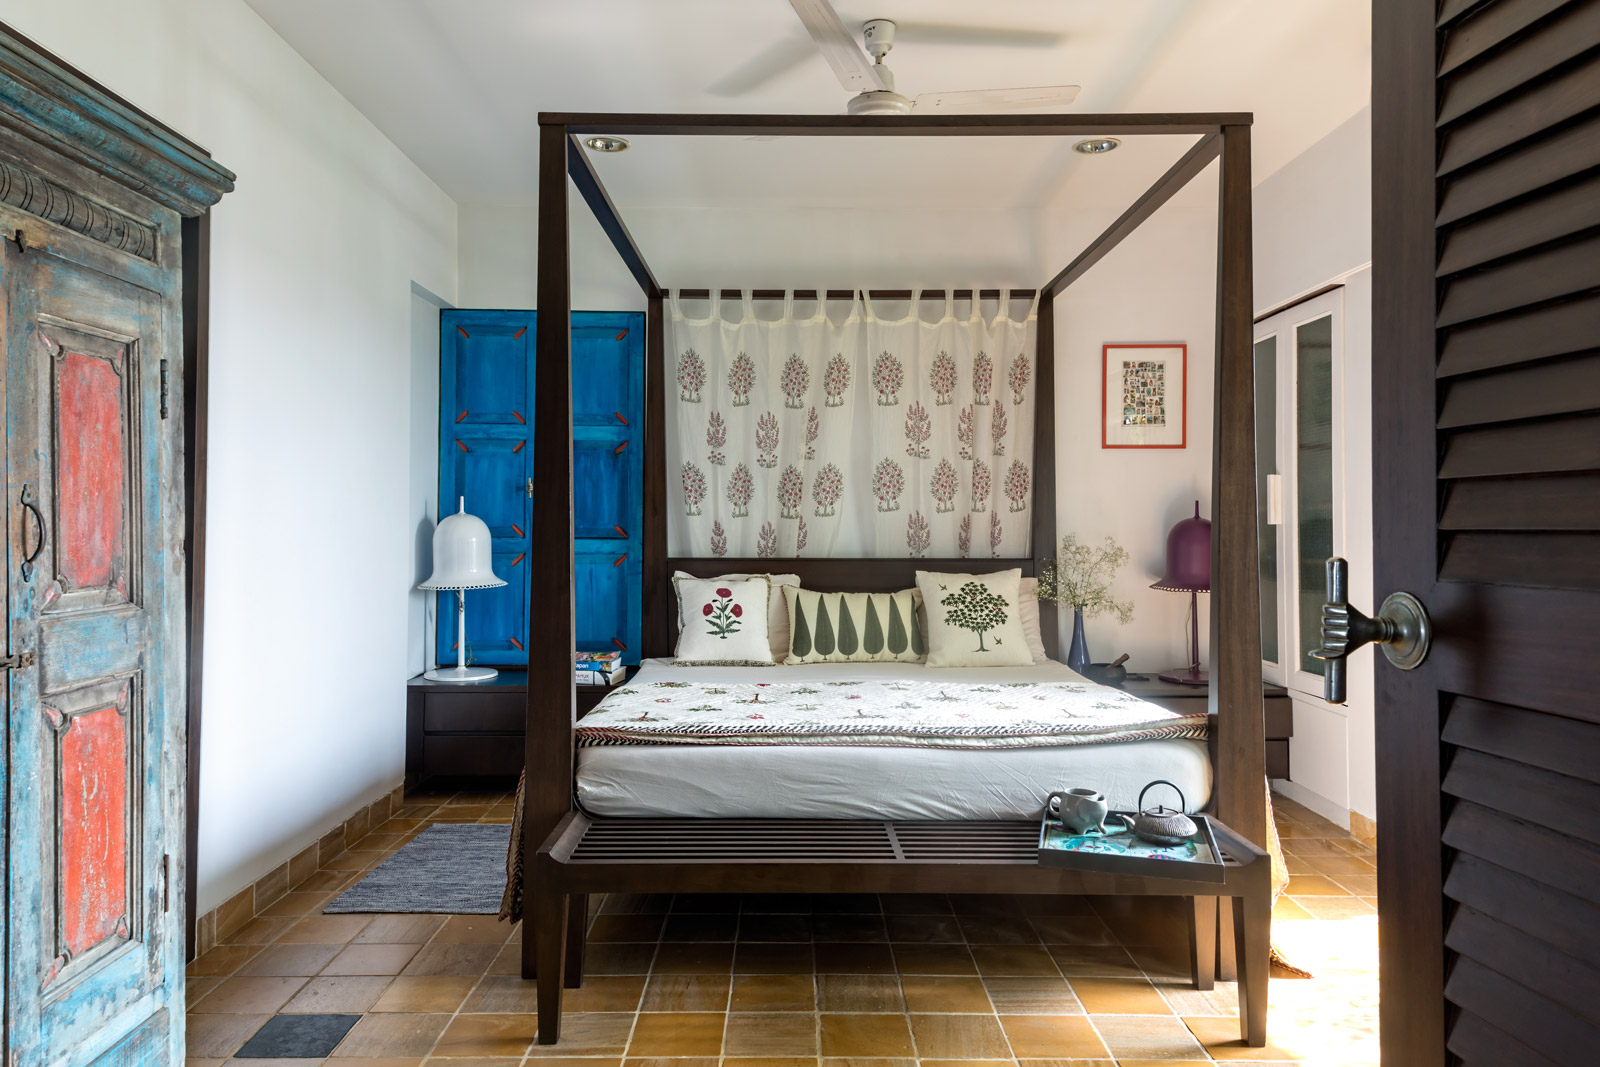 Four-Poster Bed Design Ideas To Steal - Beautiful Homes